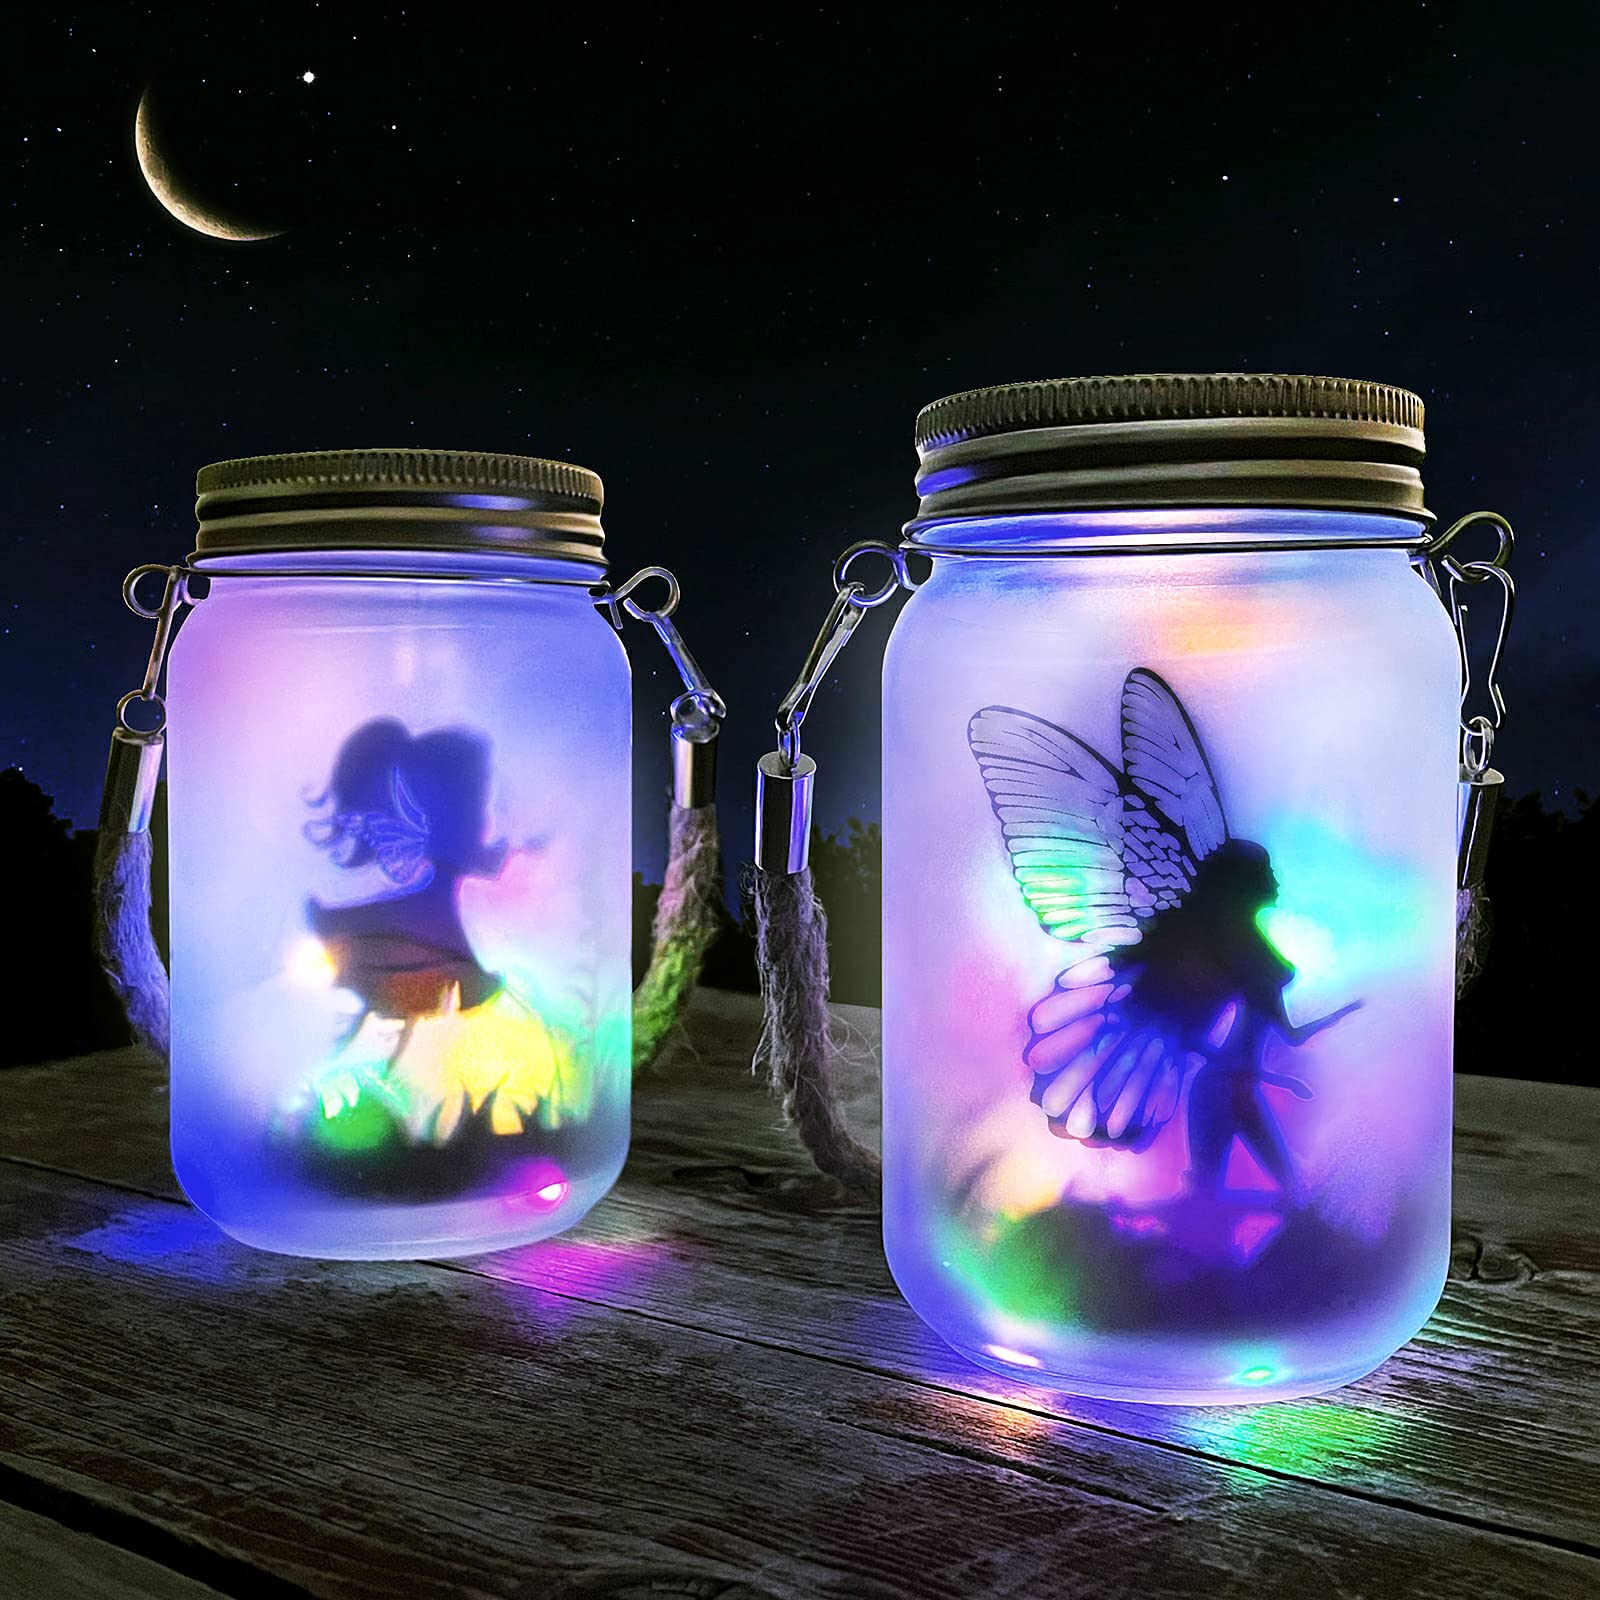 Mostof 2 Pack Solar Fairy Lantern Lights, Outdoor Hanging Frosted Glass Mason Jar Lights for Table, Yard, Garden, Patio, Lawn, Outdoor Weeding Birthday Party Decorations (Multi-Color)